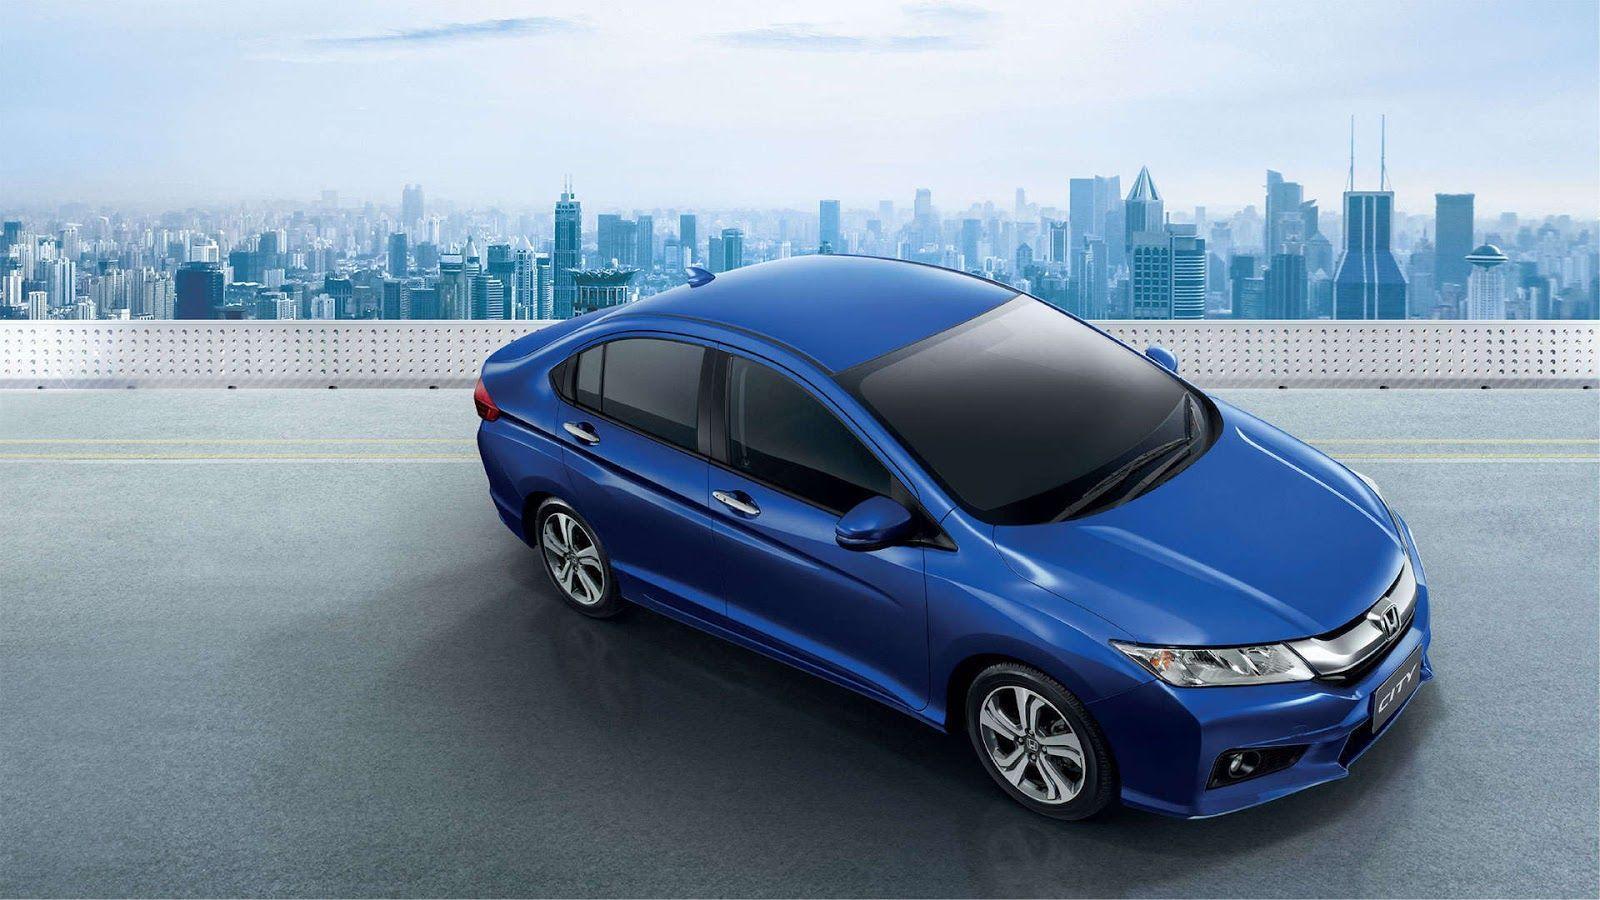 Honda City HD Wallpaper, Picture, Image And Photo Gallary